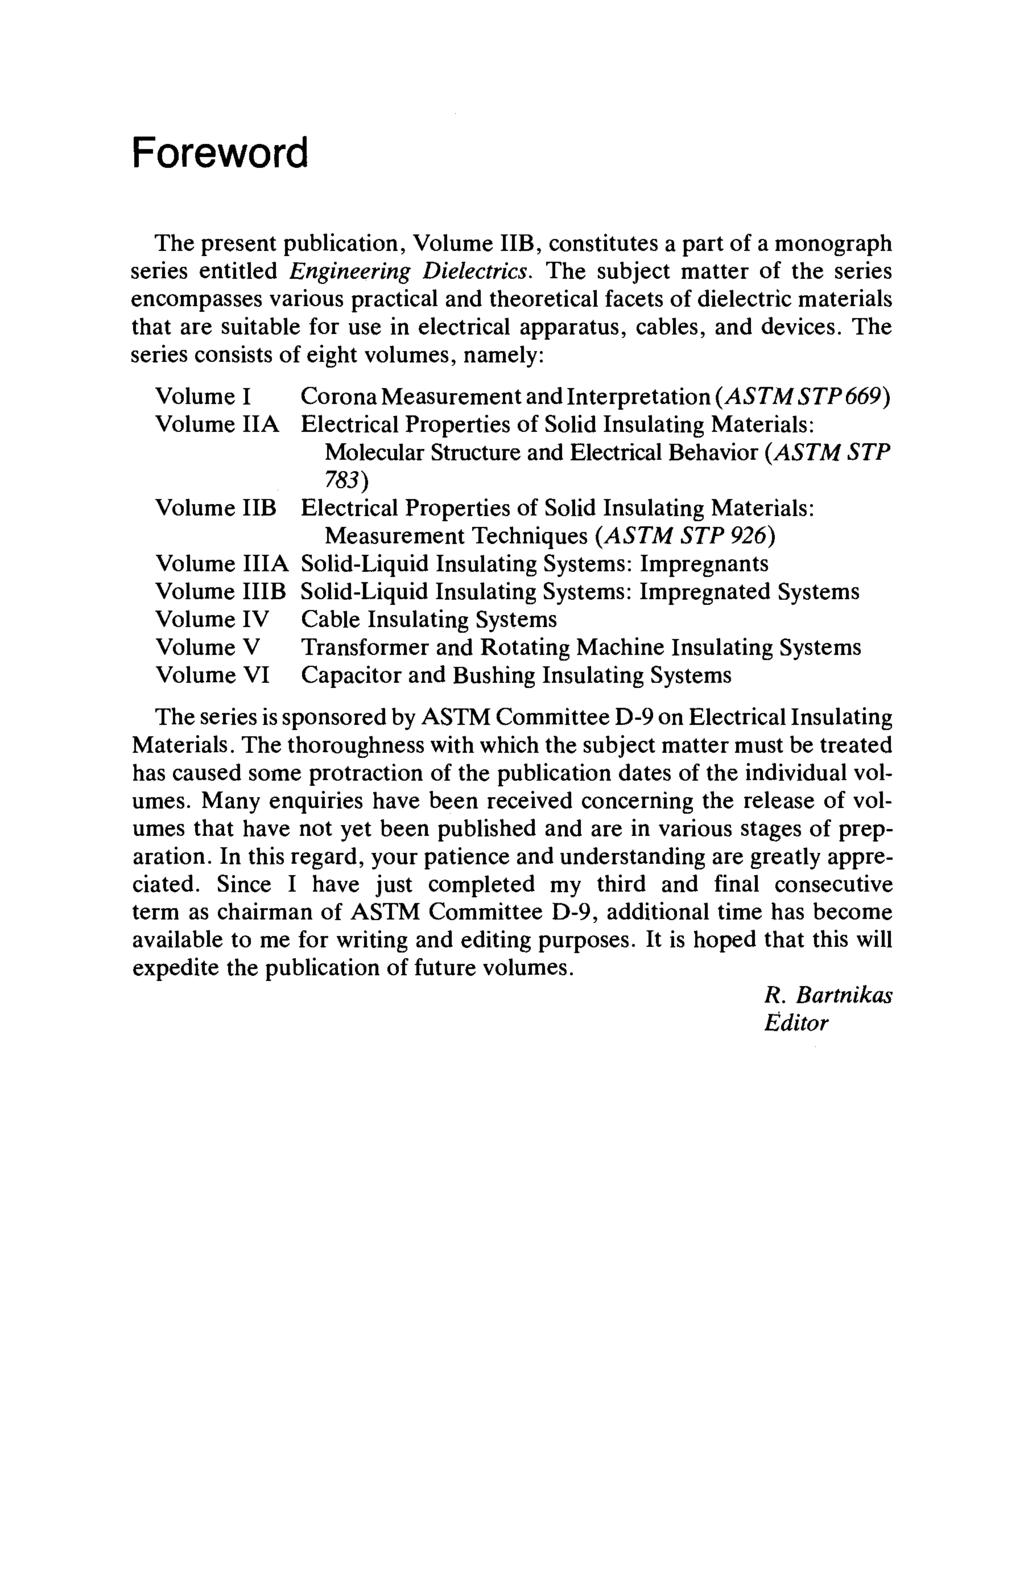 Foreword The present publication, Volume IIB, constitutes a part of a monograph series entitled Engineering Dielectrics.